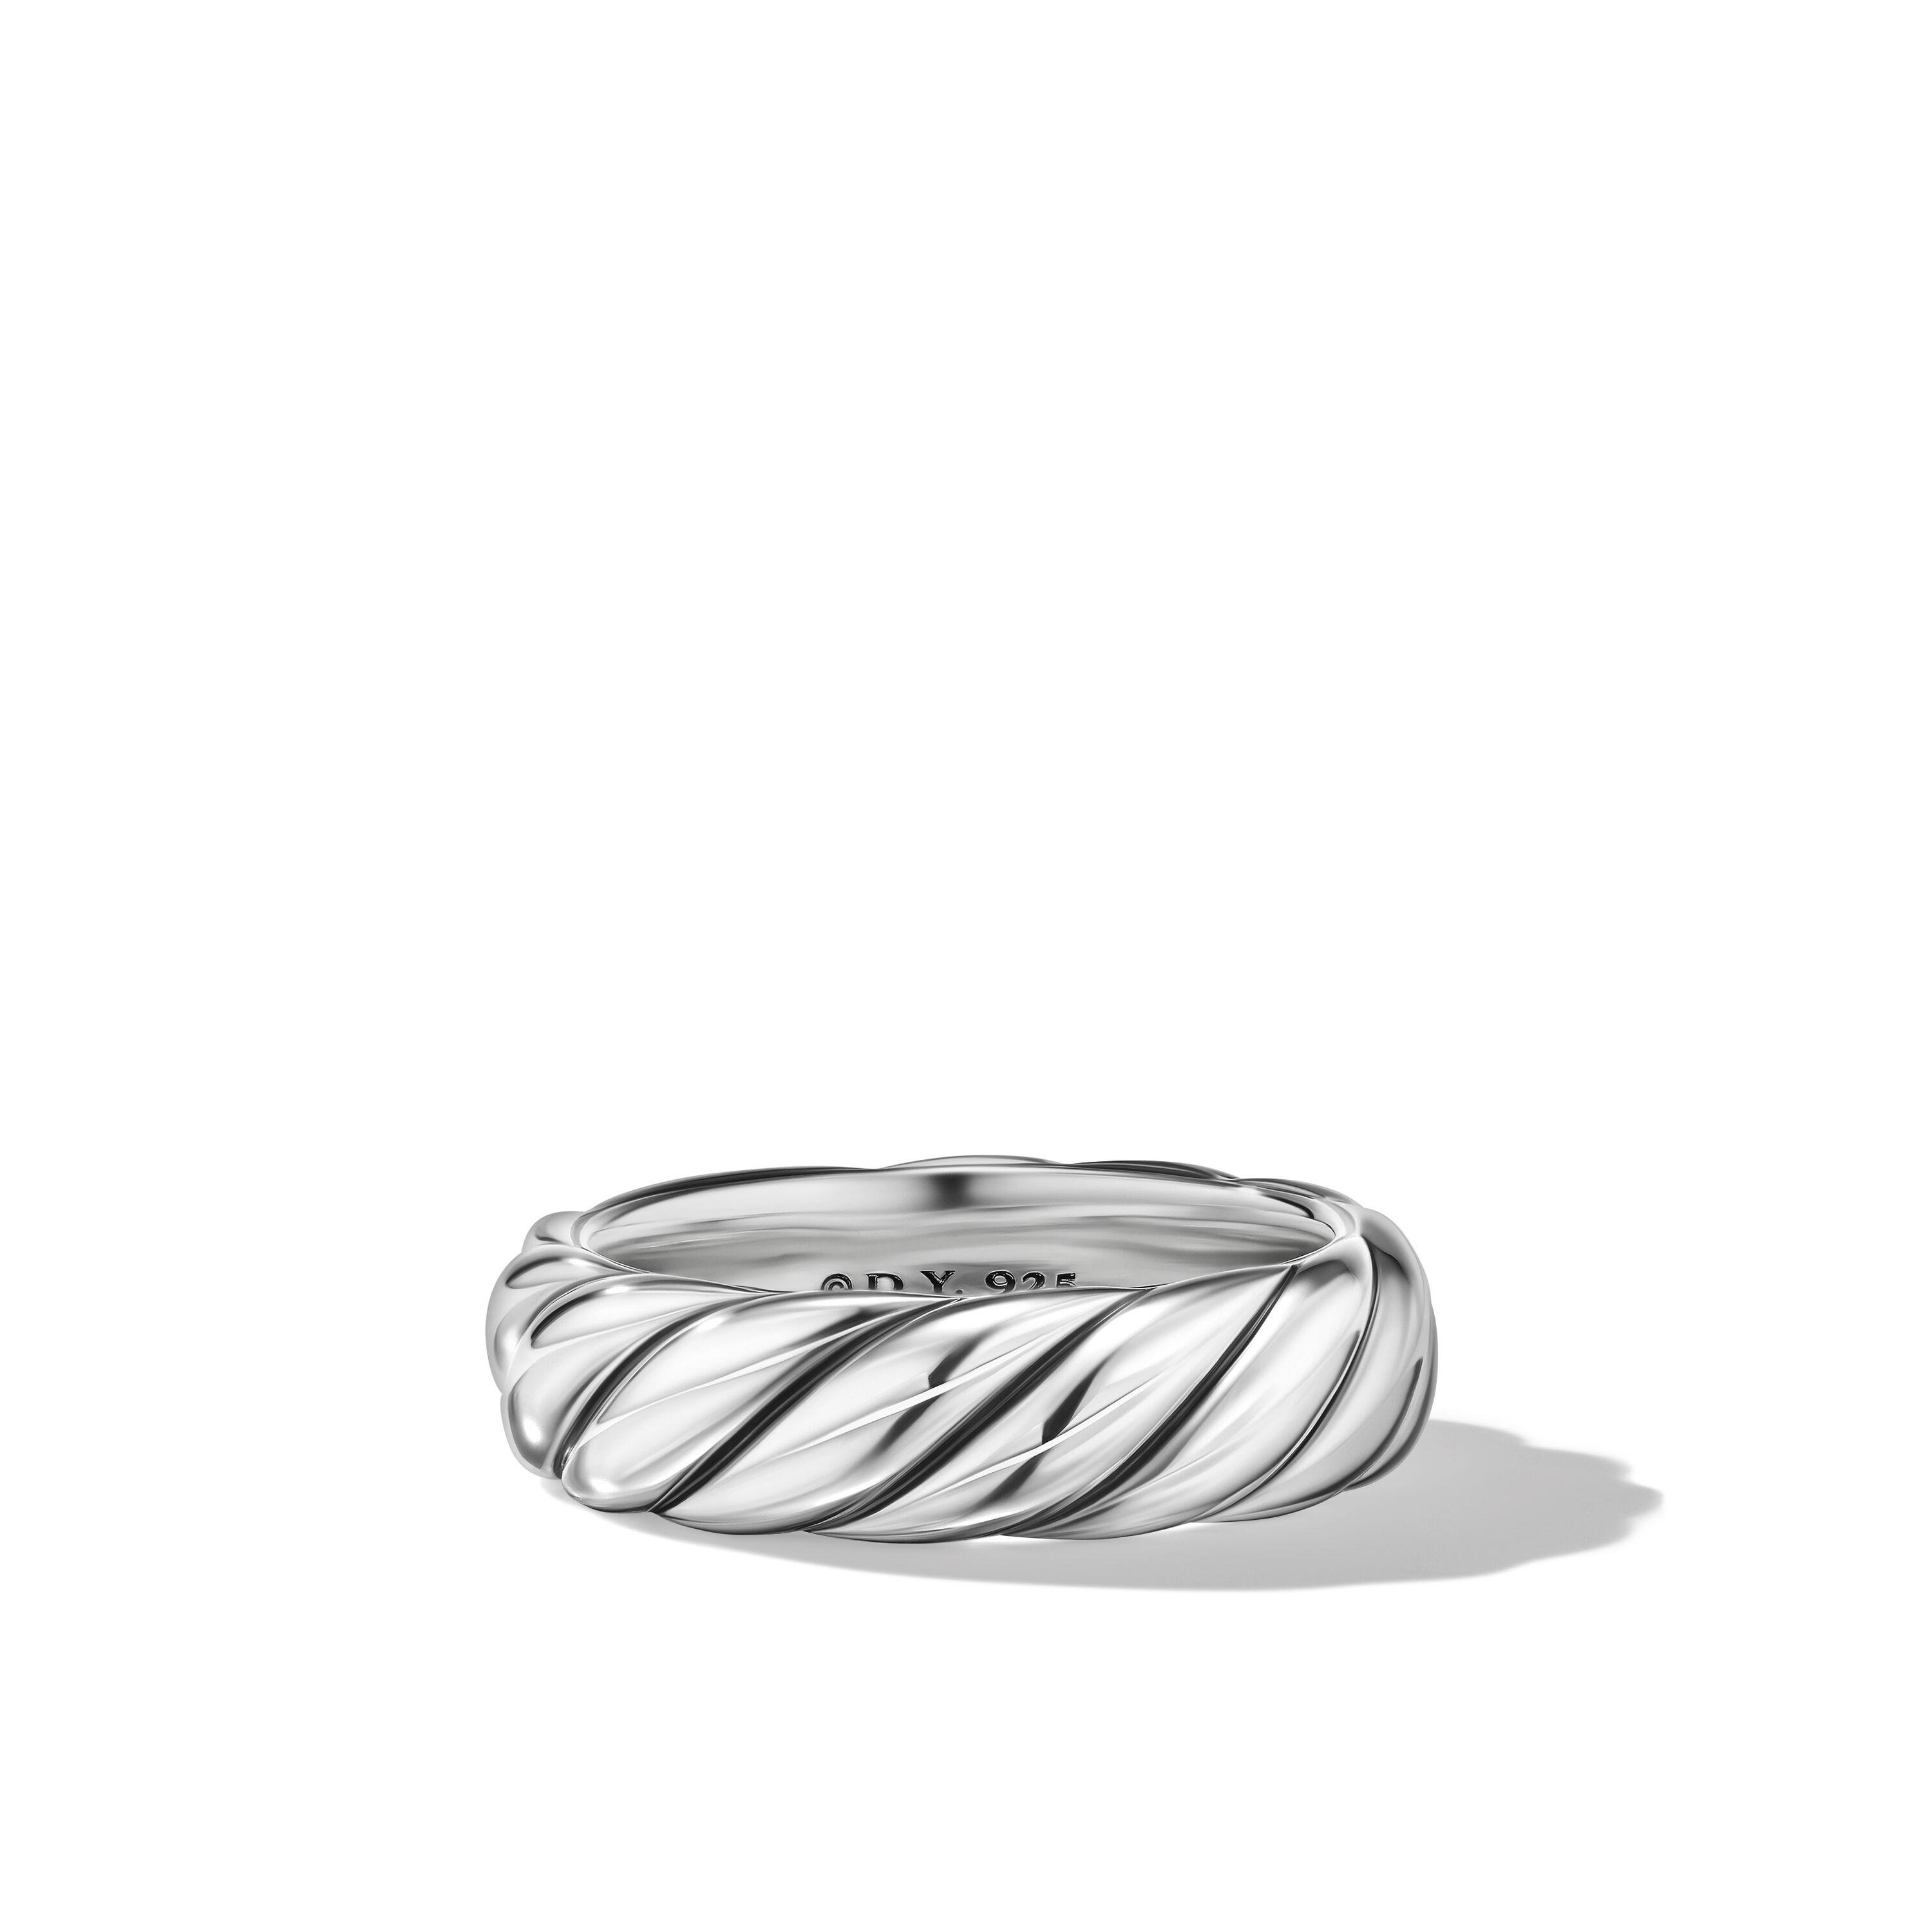 David Yurman Sculpted Cable 6mm Band in Sterling Silver, size 7